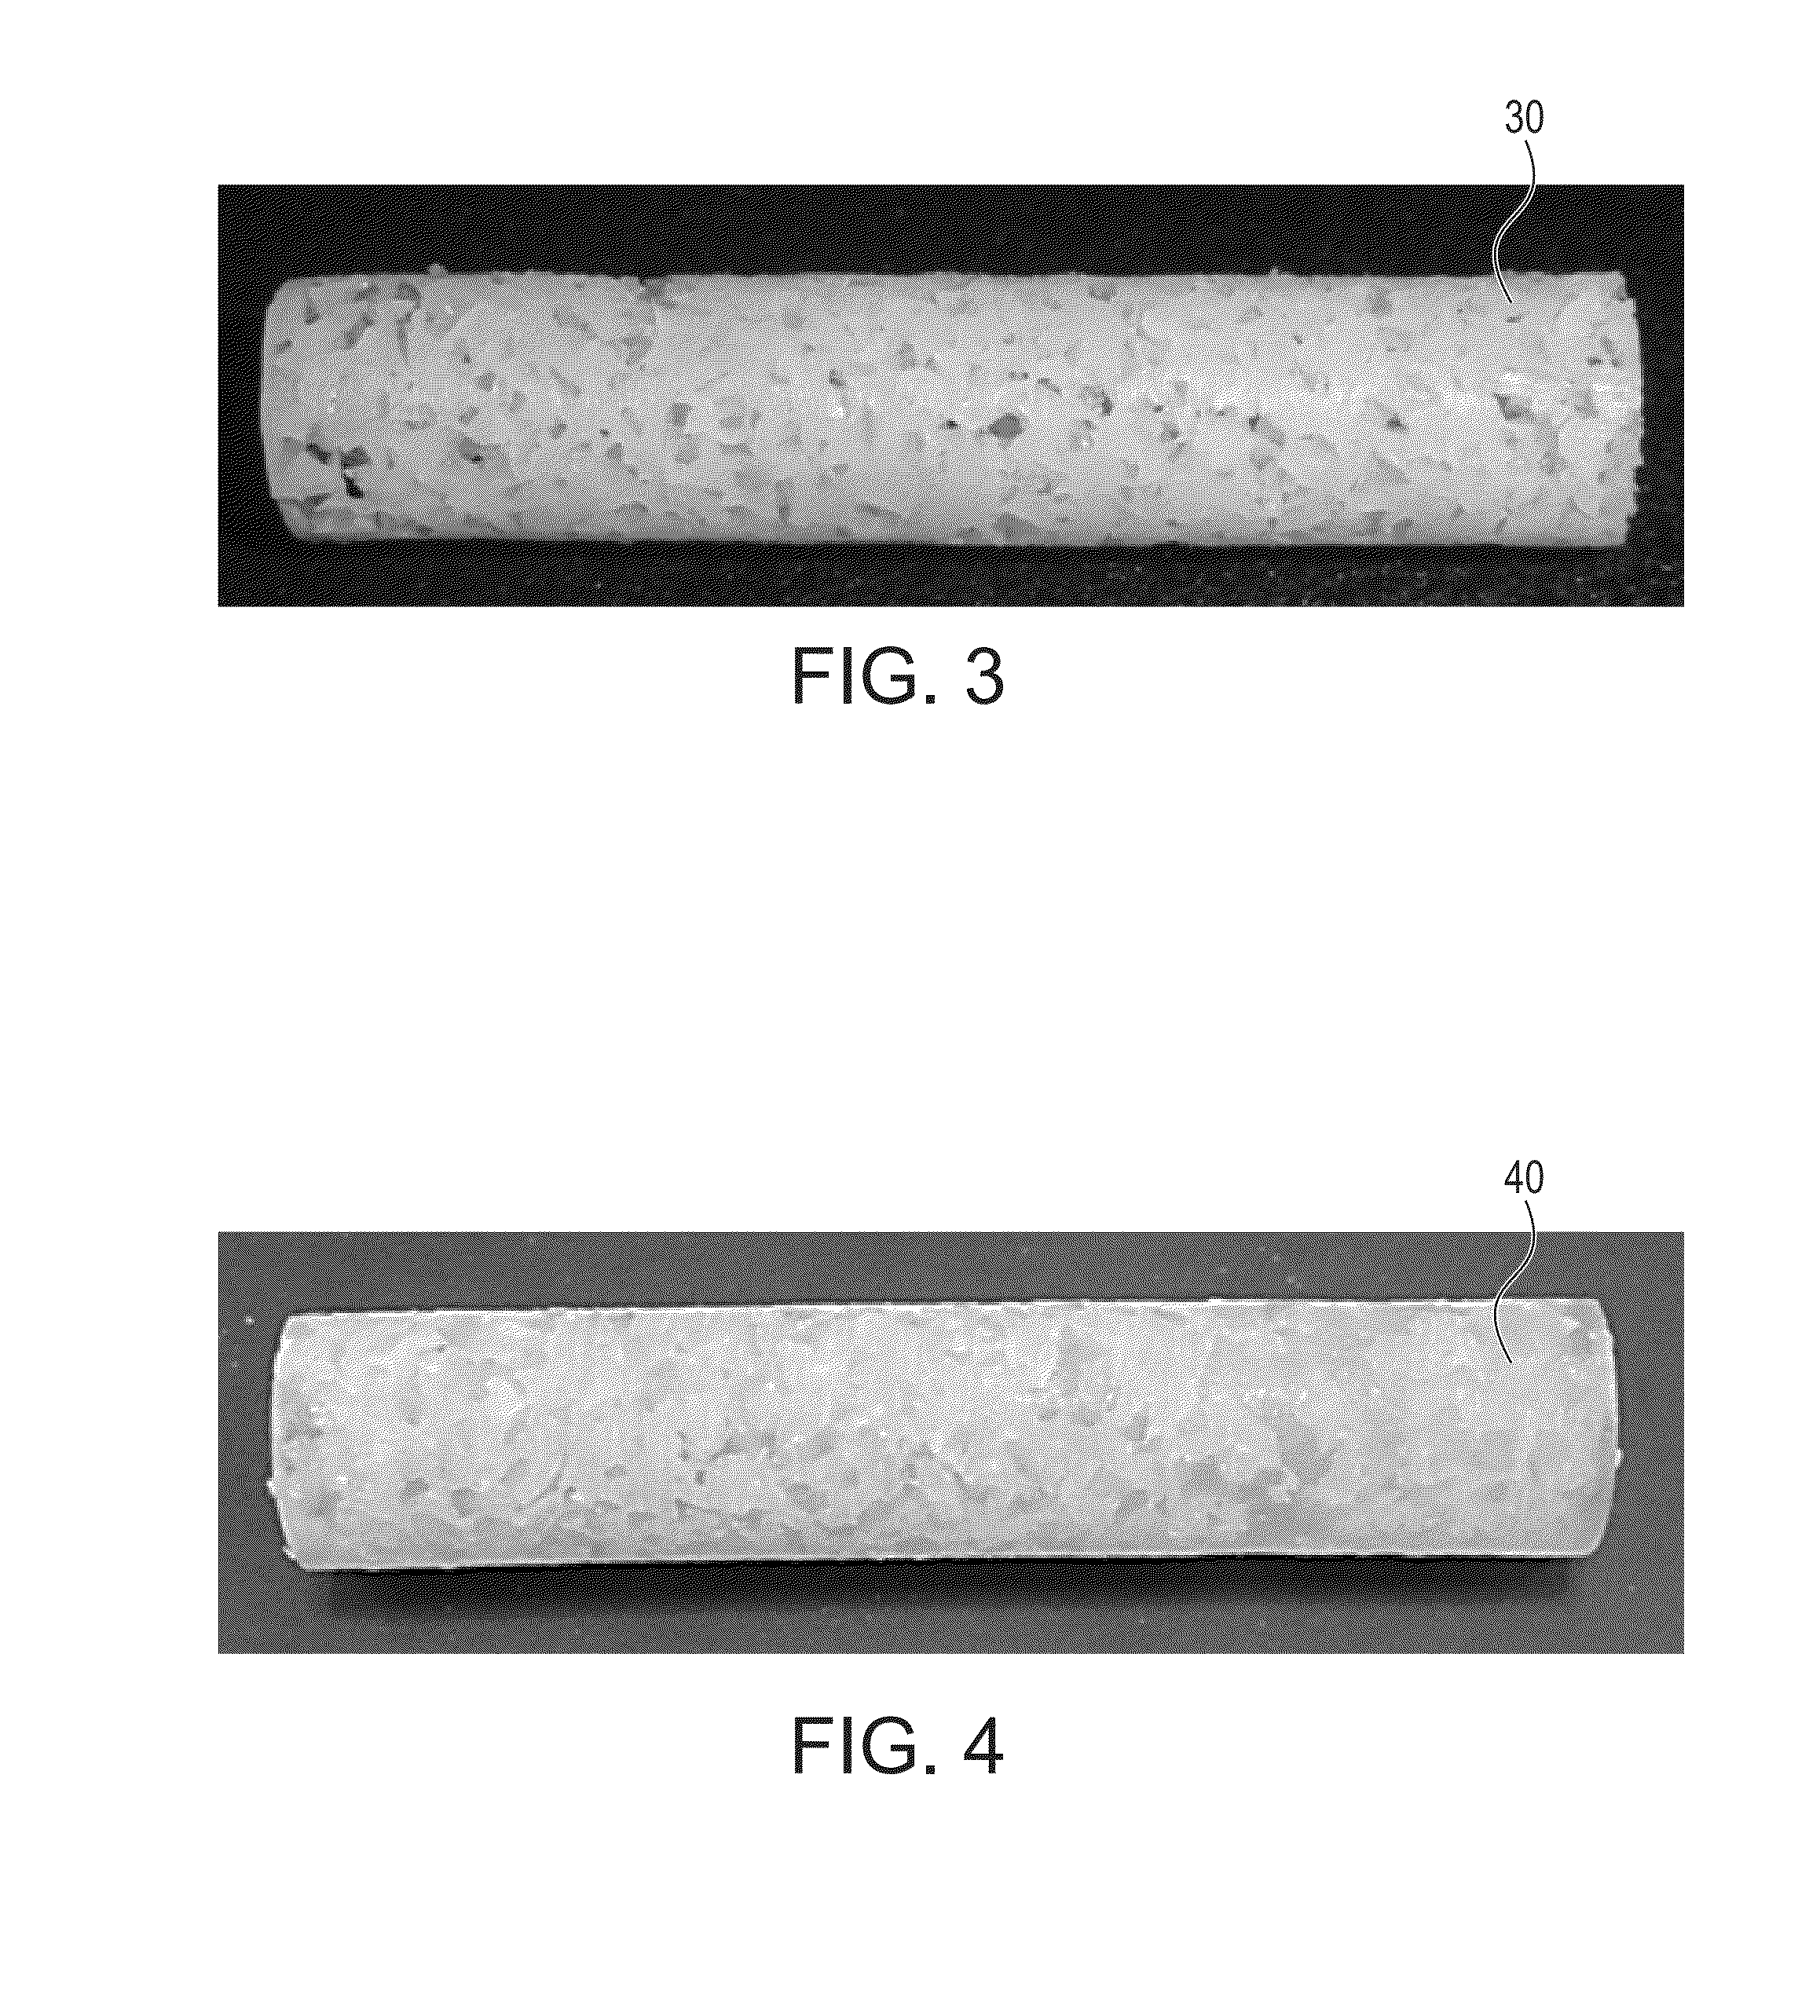 Modified porous materials and methods of creating interconnected porosity in materials